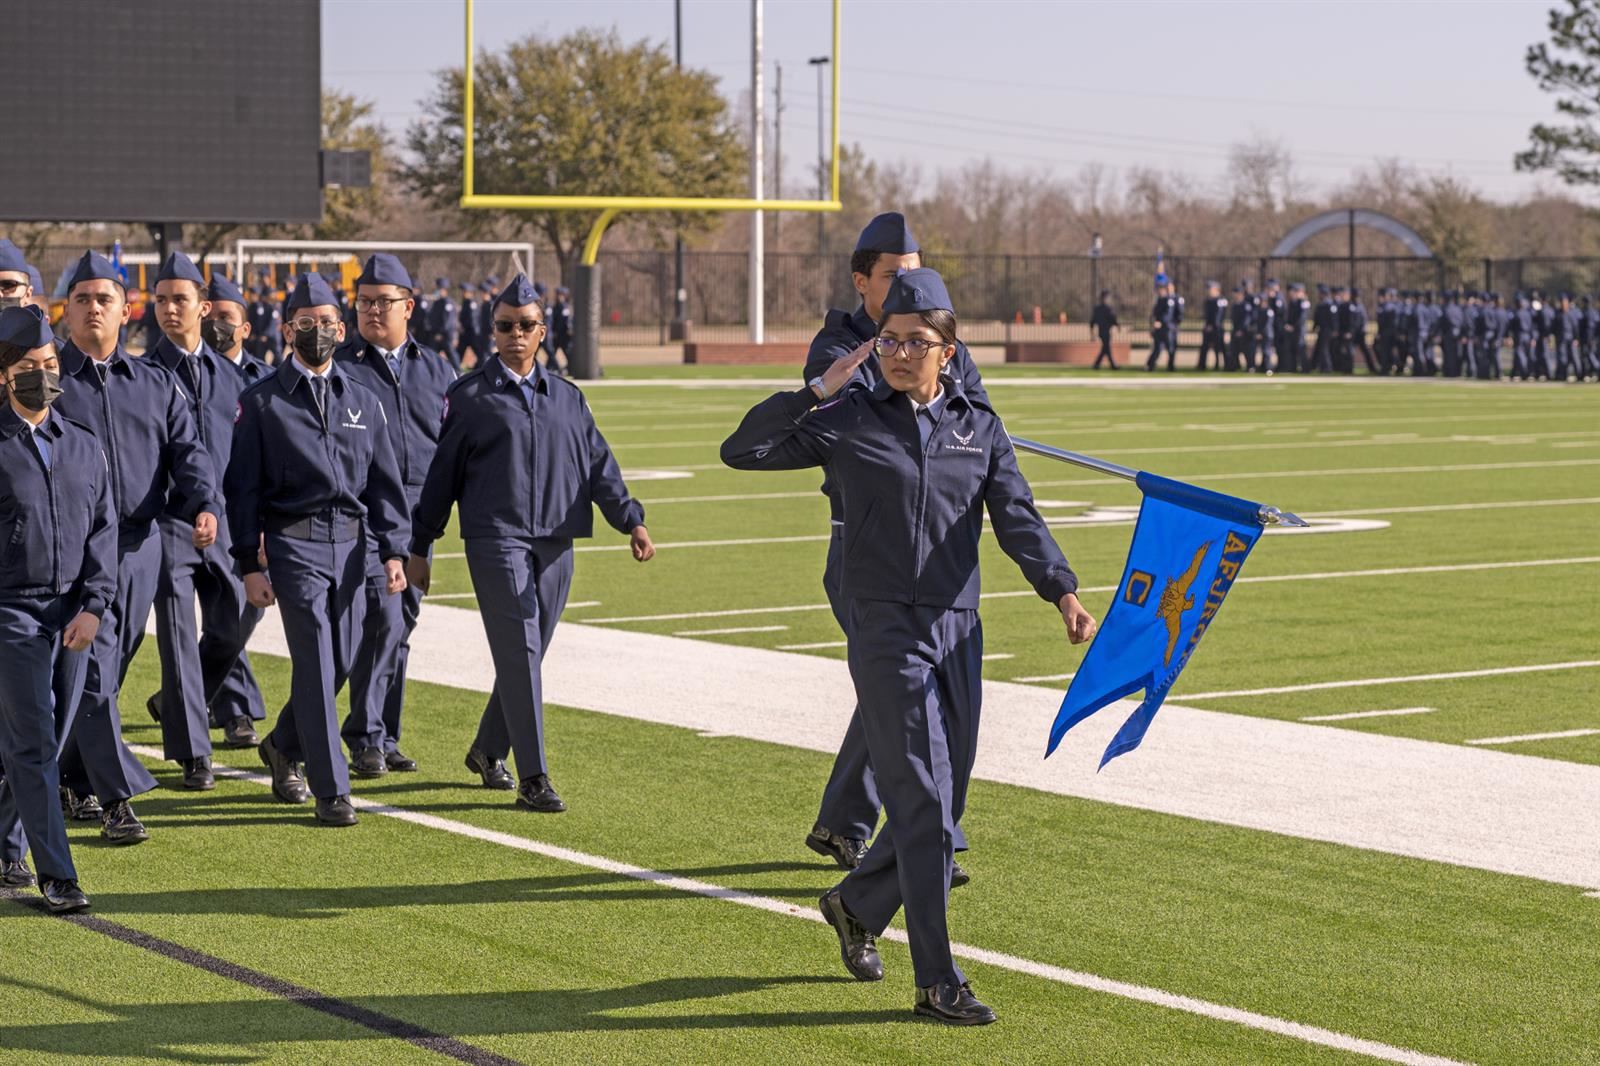 Cadets in the Cypress Springs High School AFJROTC Unit TX-20016 march in unison in front of the many guests and dignitaries.